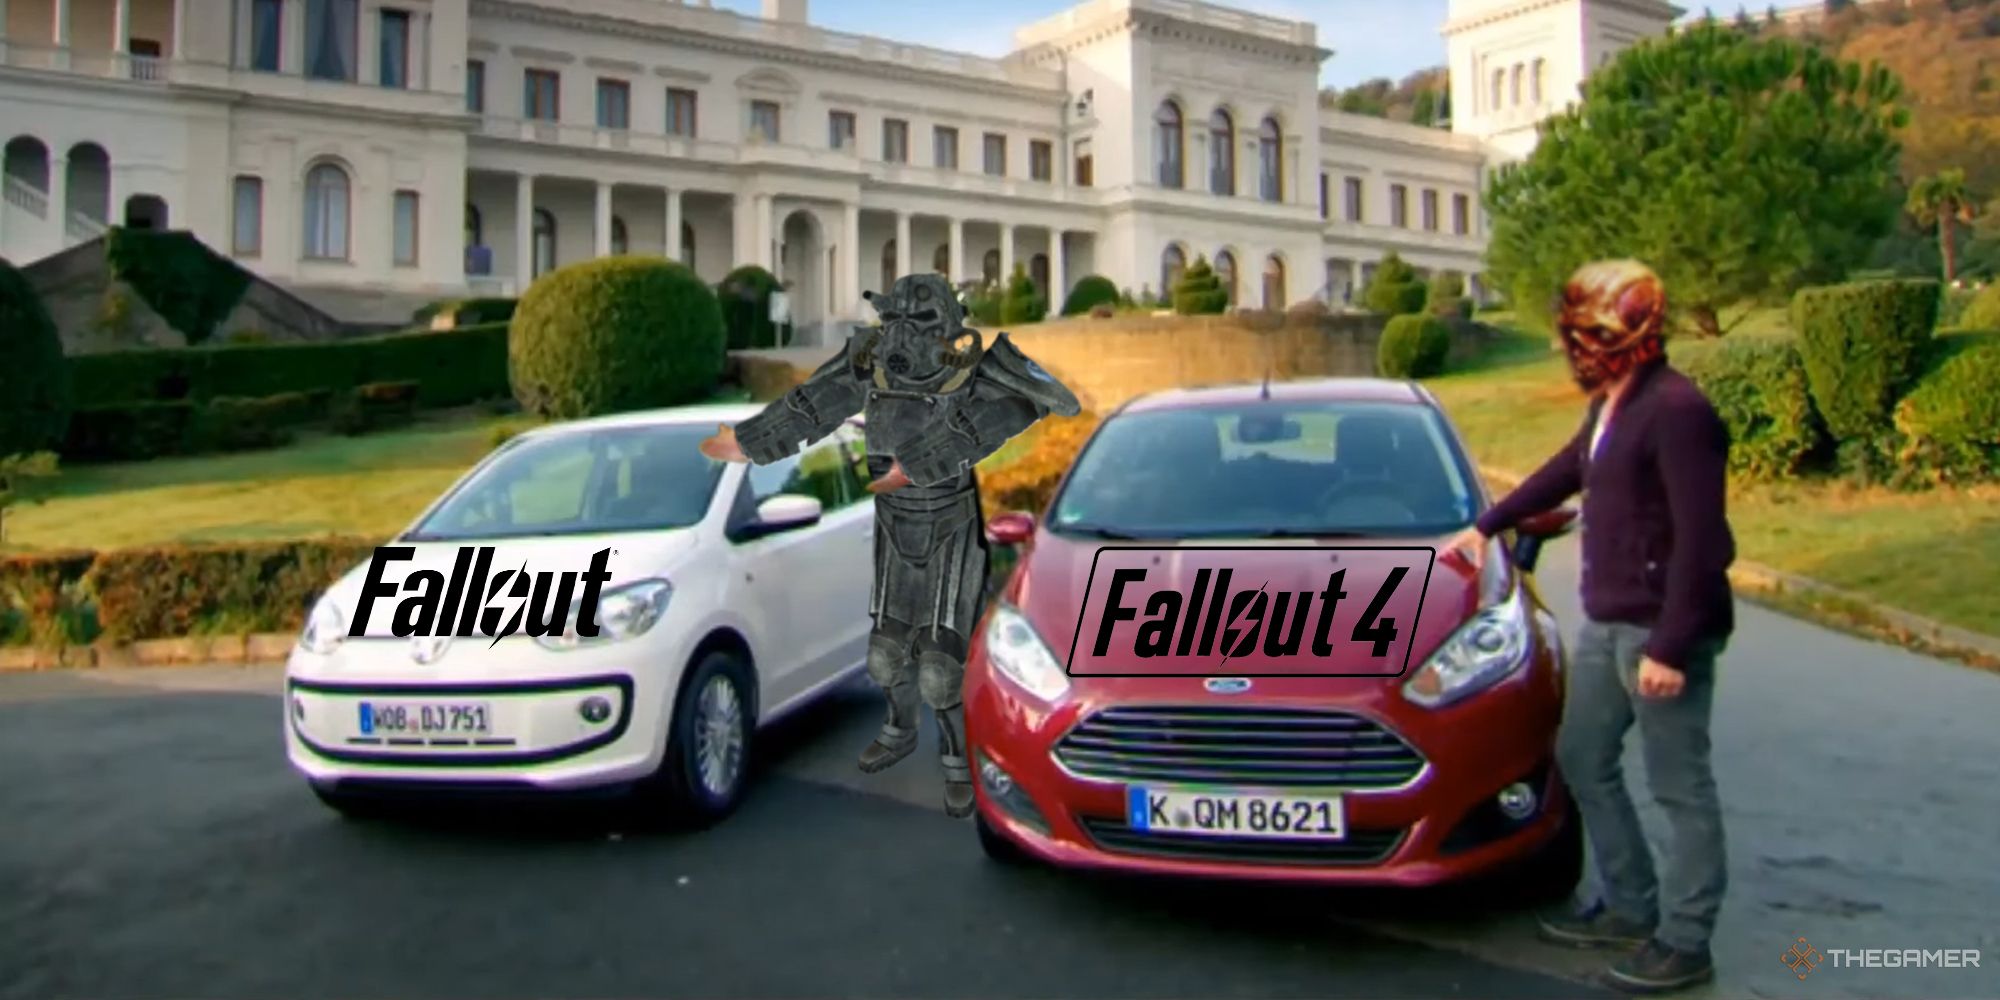 I Like Fallout The Show Way More Than Fallout The Game